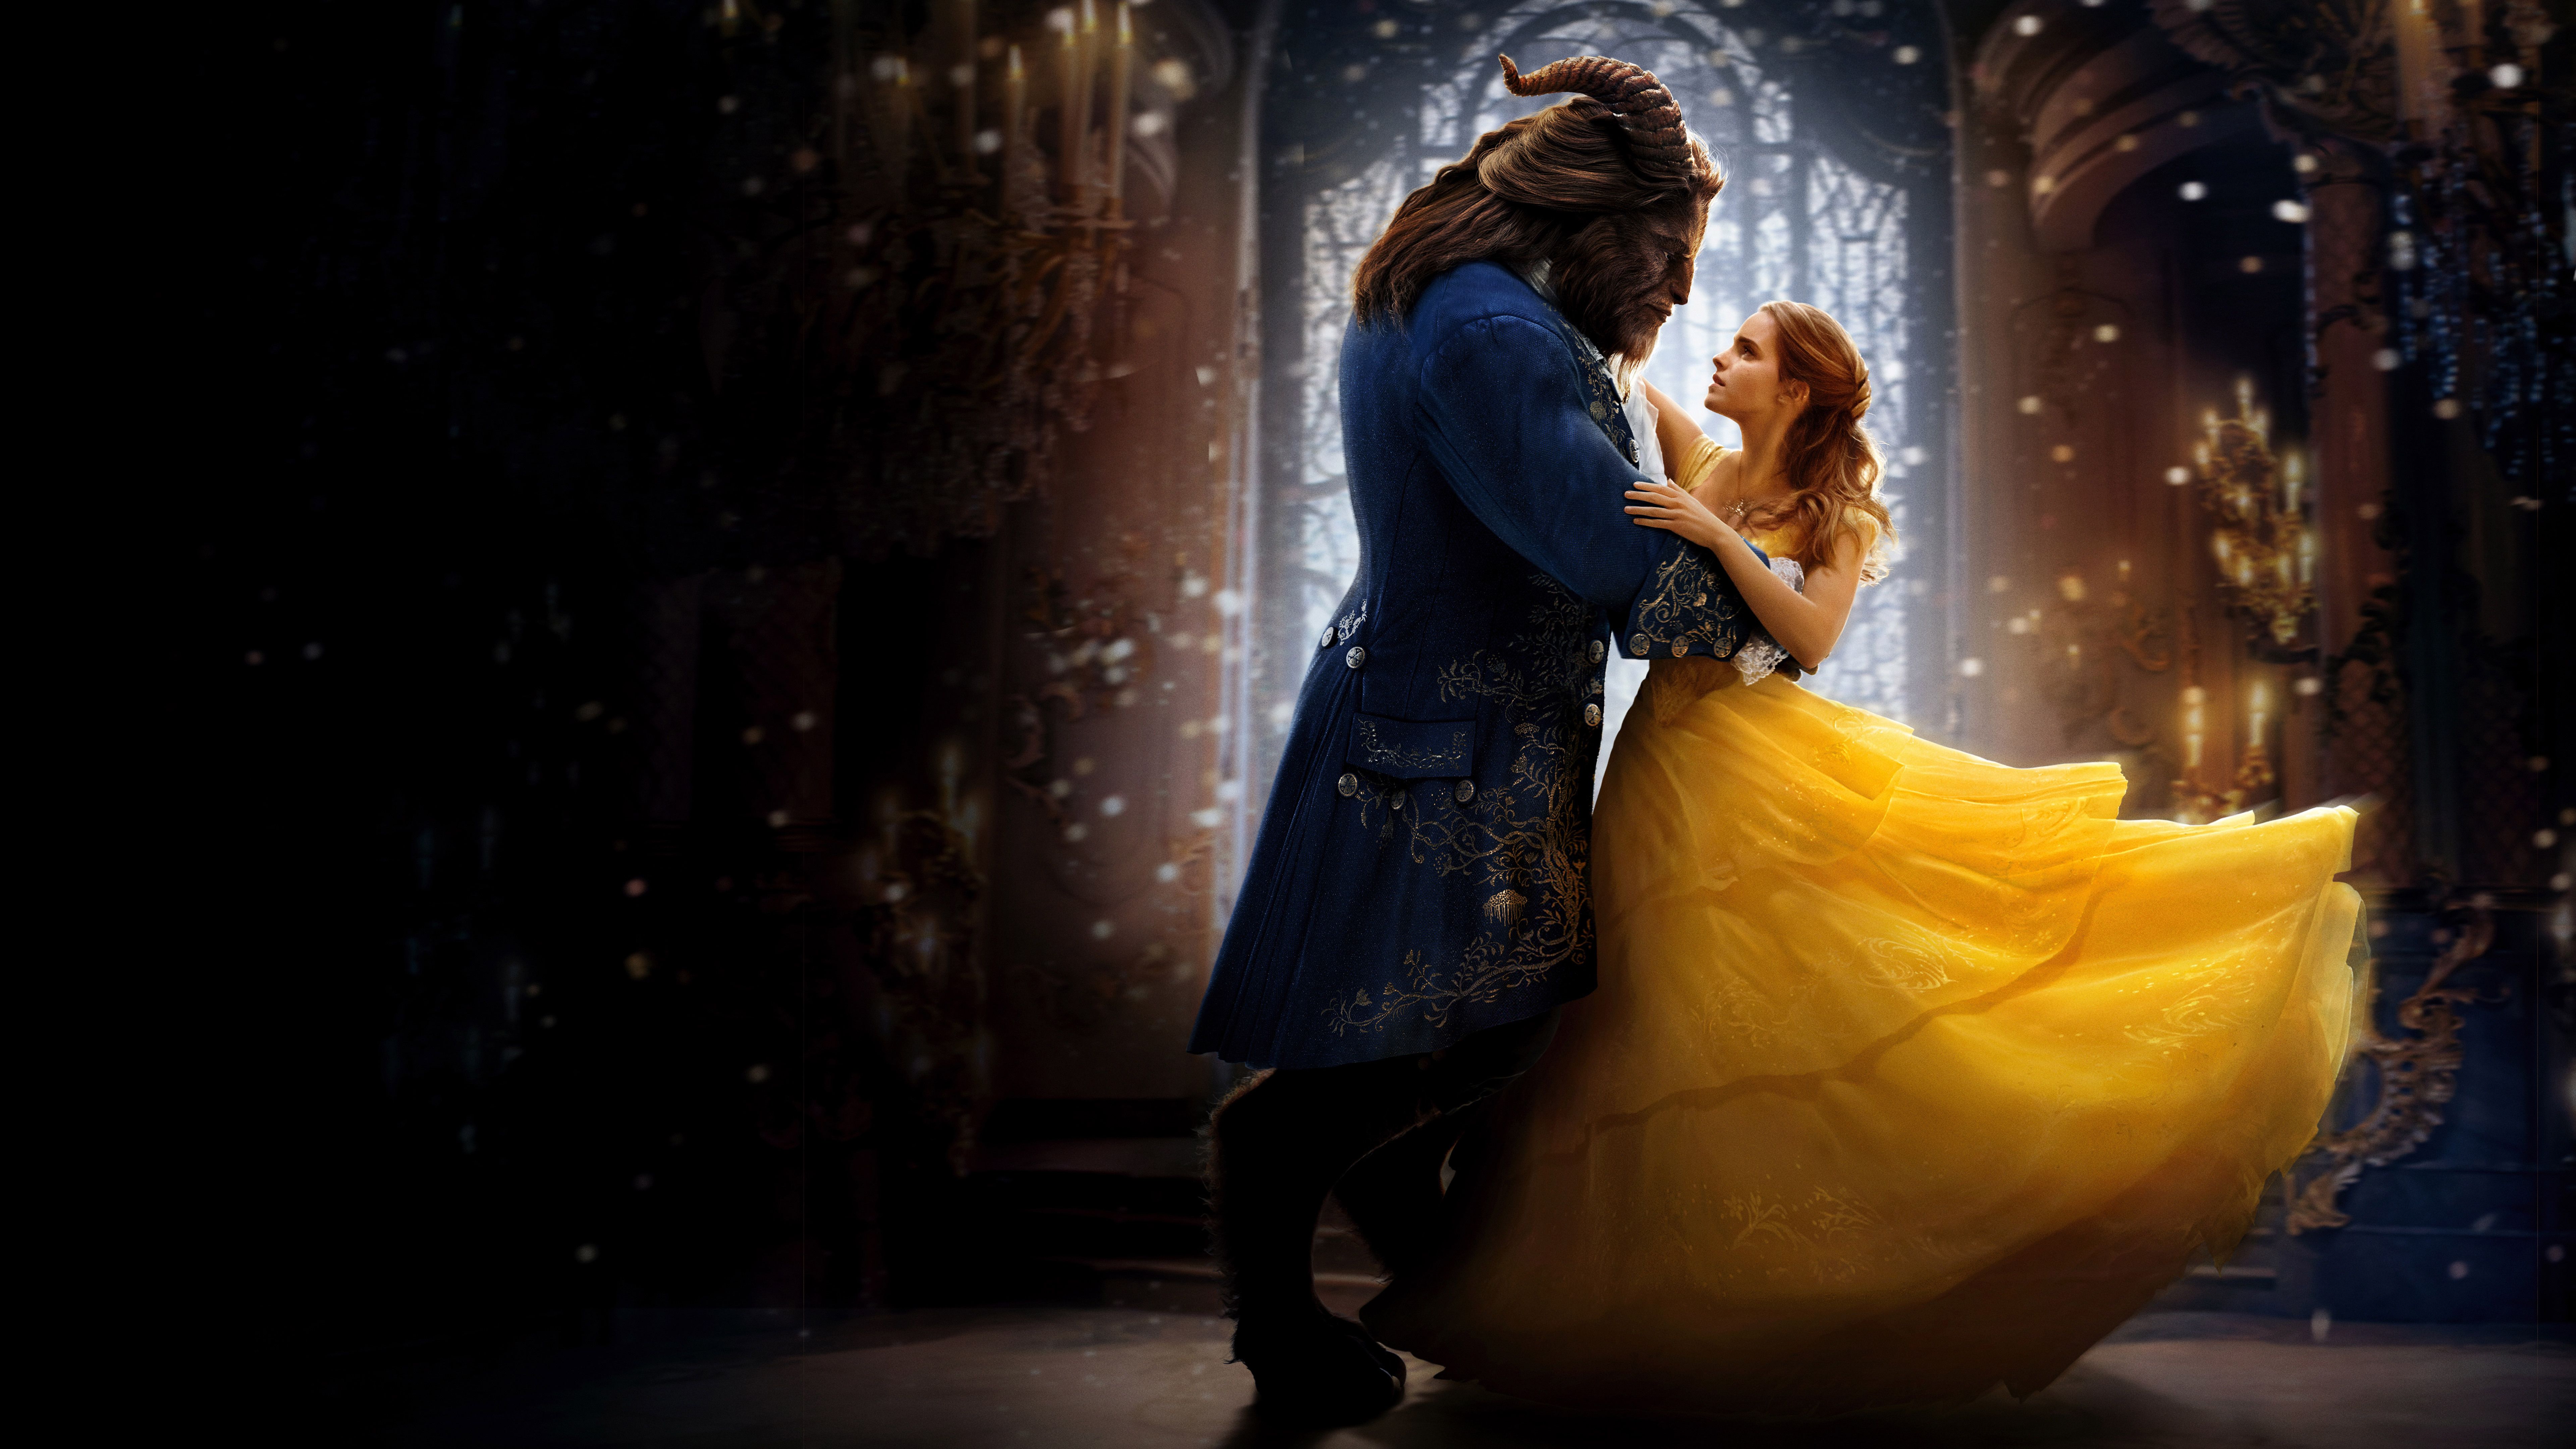 Beauty And The Beast Wallpaper HD